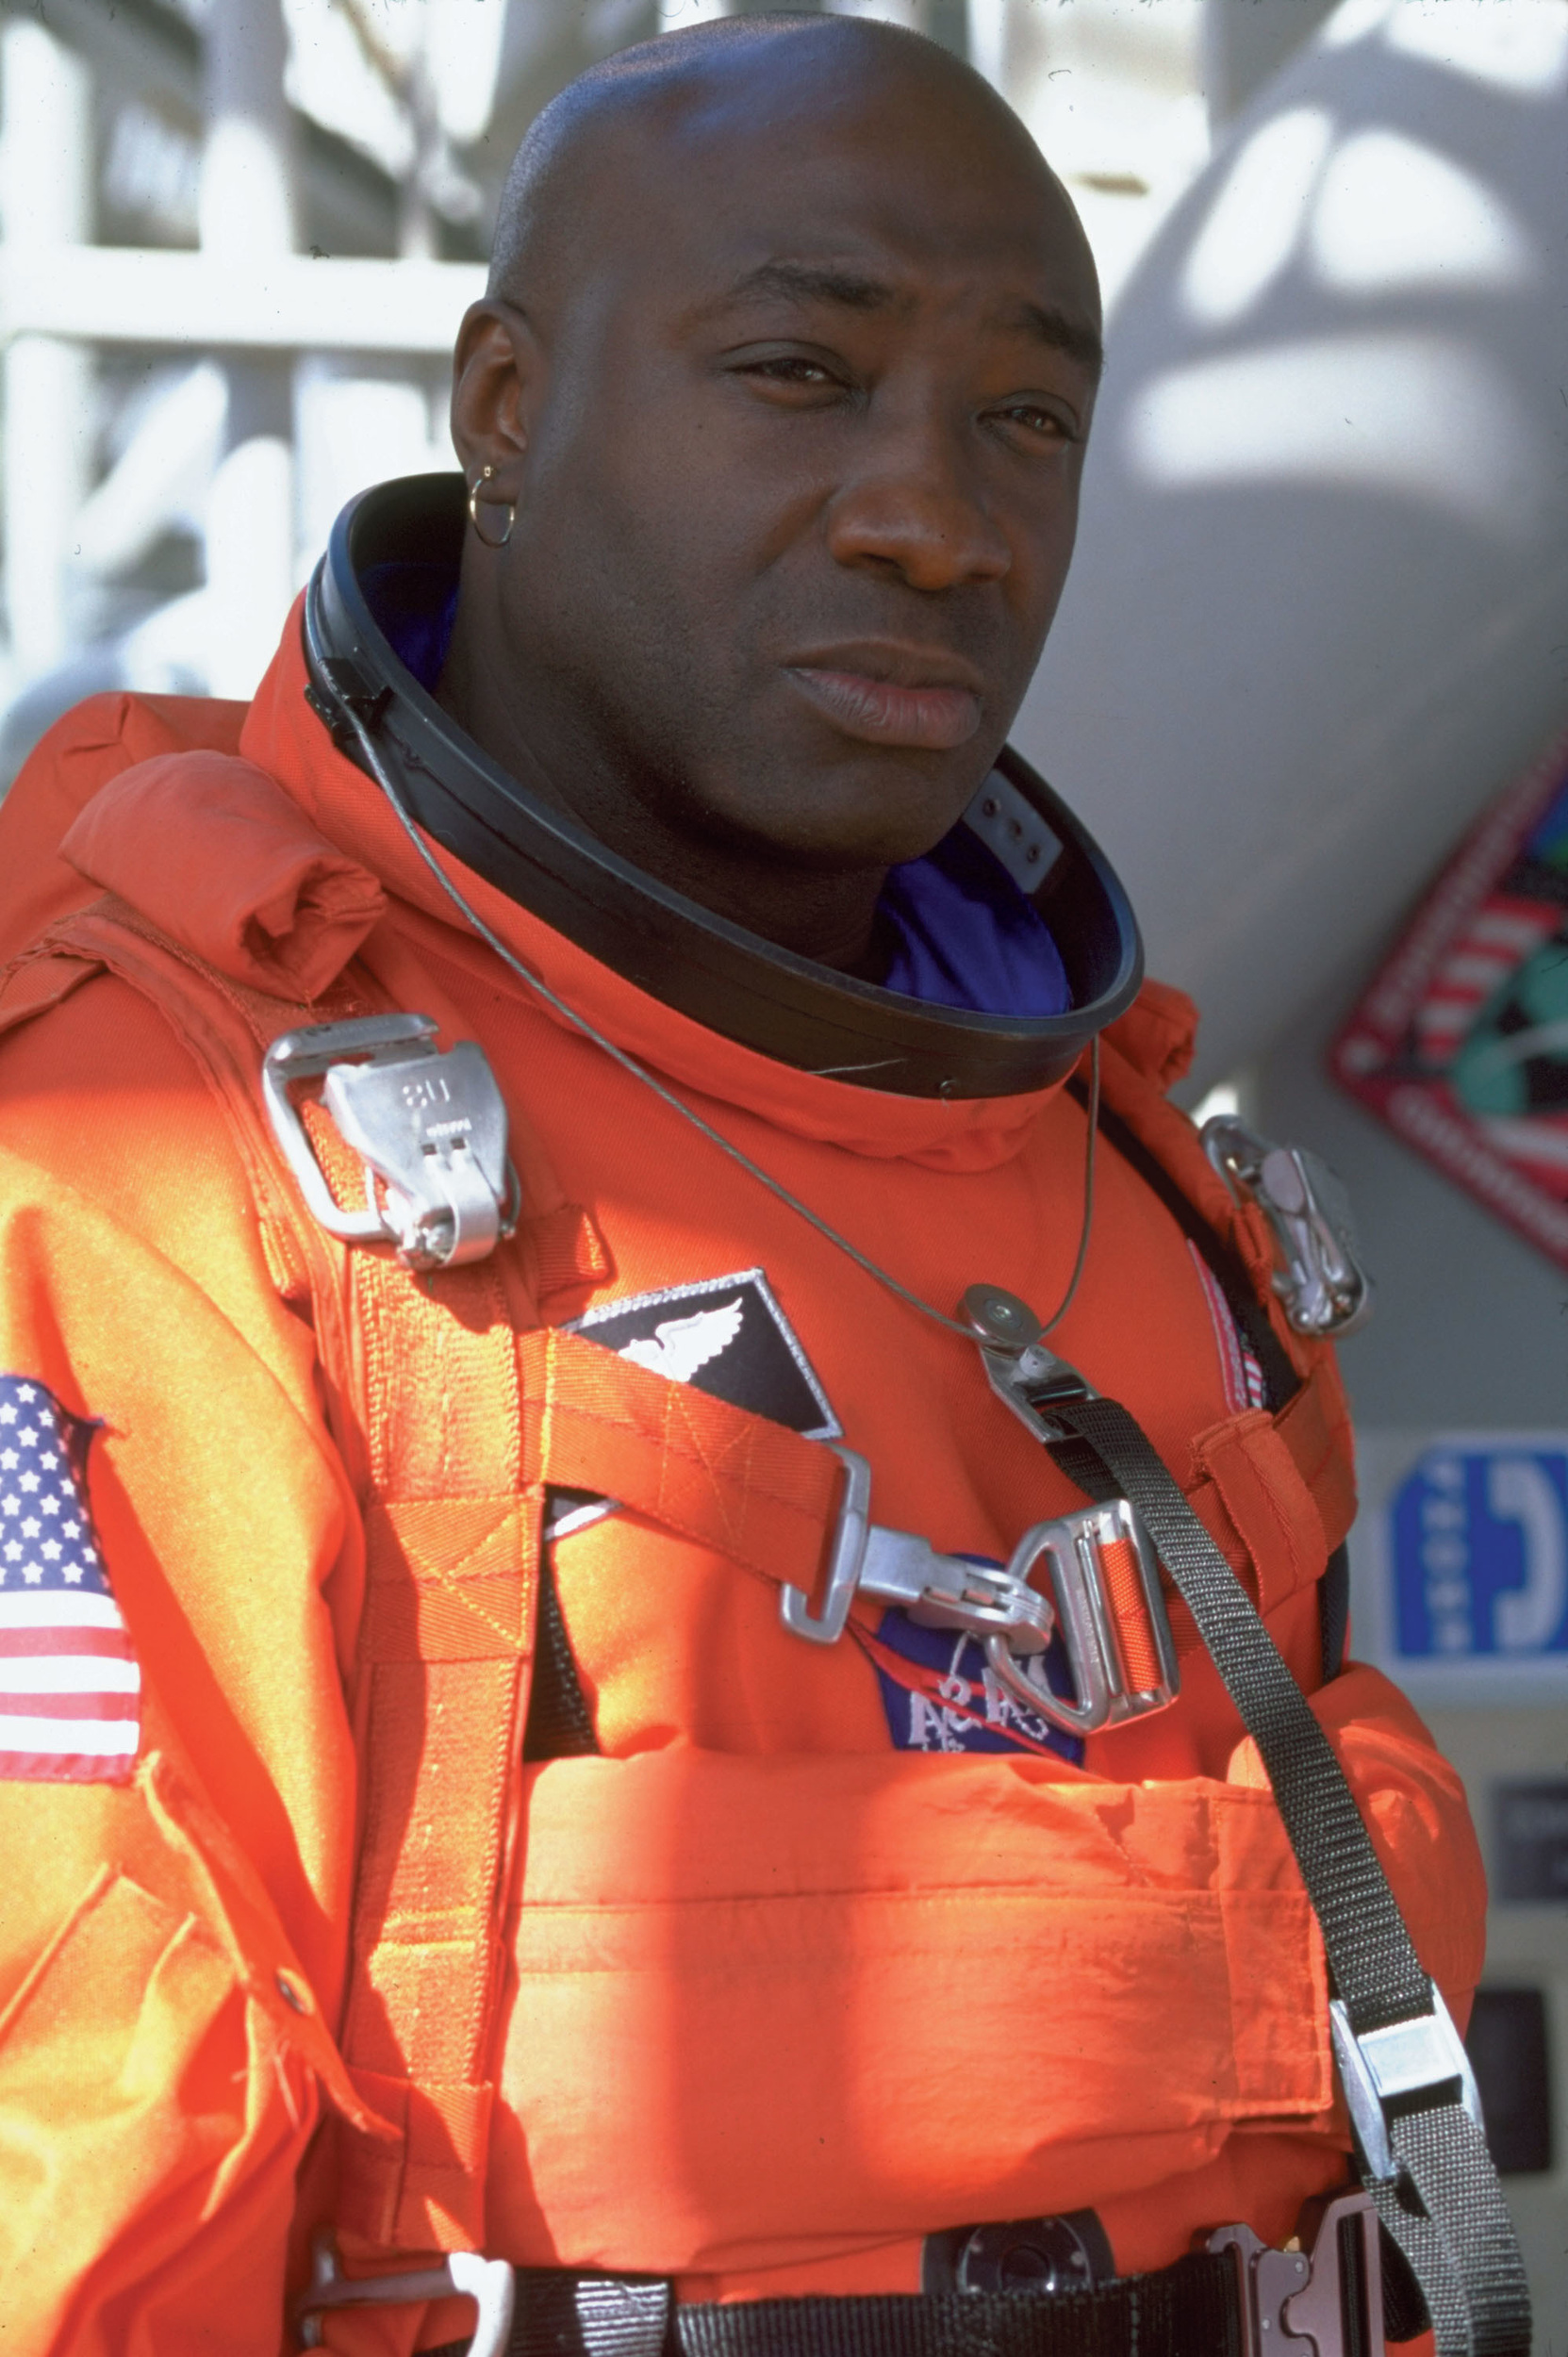 <p>Prior to <em>Armageddon</em>, Duncan had only been in a few movies, with roles like <em>Bodyguard</em> and <em>Bouncer</em>. This was his chance for a breakout role in a big movie. Evidently, the pressure got to him a bit. Duncan reportedly was having trouble with his performance early on, until Bay and Willis pulled him aside and said that they might have to replace him if he couldn’t replicate the energy of his audition. Apparently, this was the kick in the pants Duncan needed, and he kept the role and had his breakout performance.</p><p>You may also like: <a href='https://www.yardbarker.com/entertainment/articles/the_villains_from_90s_movies_who_we_love_to_hate_031324/s1__32965436'>The villains from '90s movies who we love to hate</a></p>